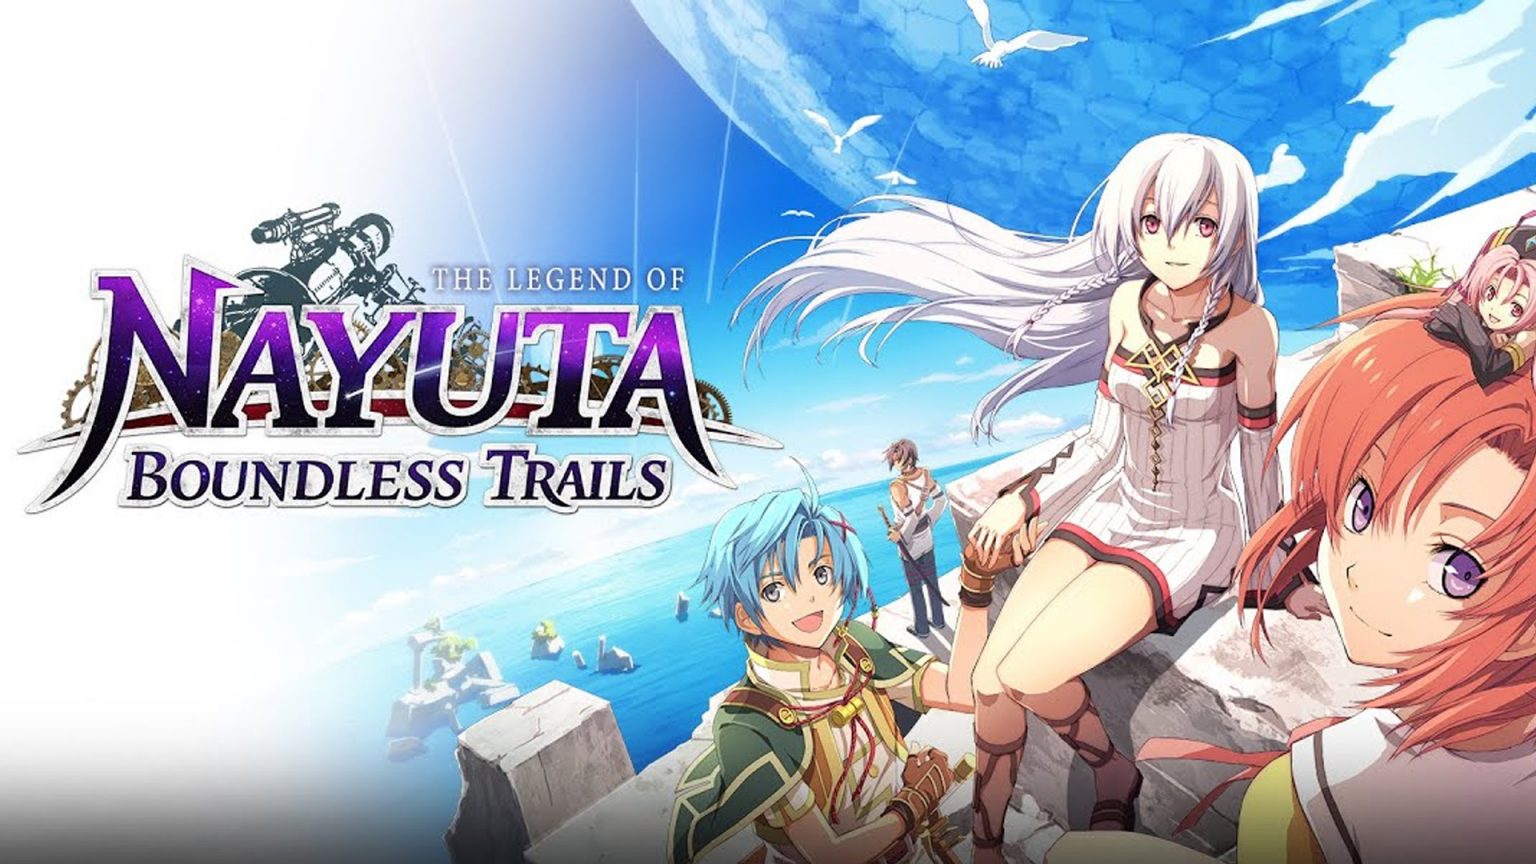 download the new The Legend of Nayuta: Boundless Trails